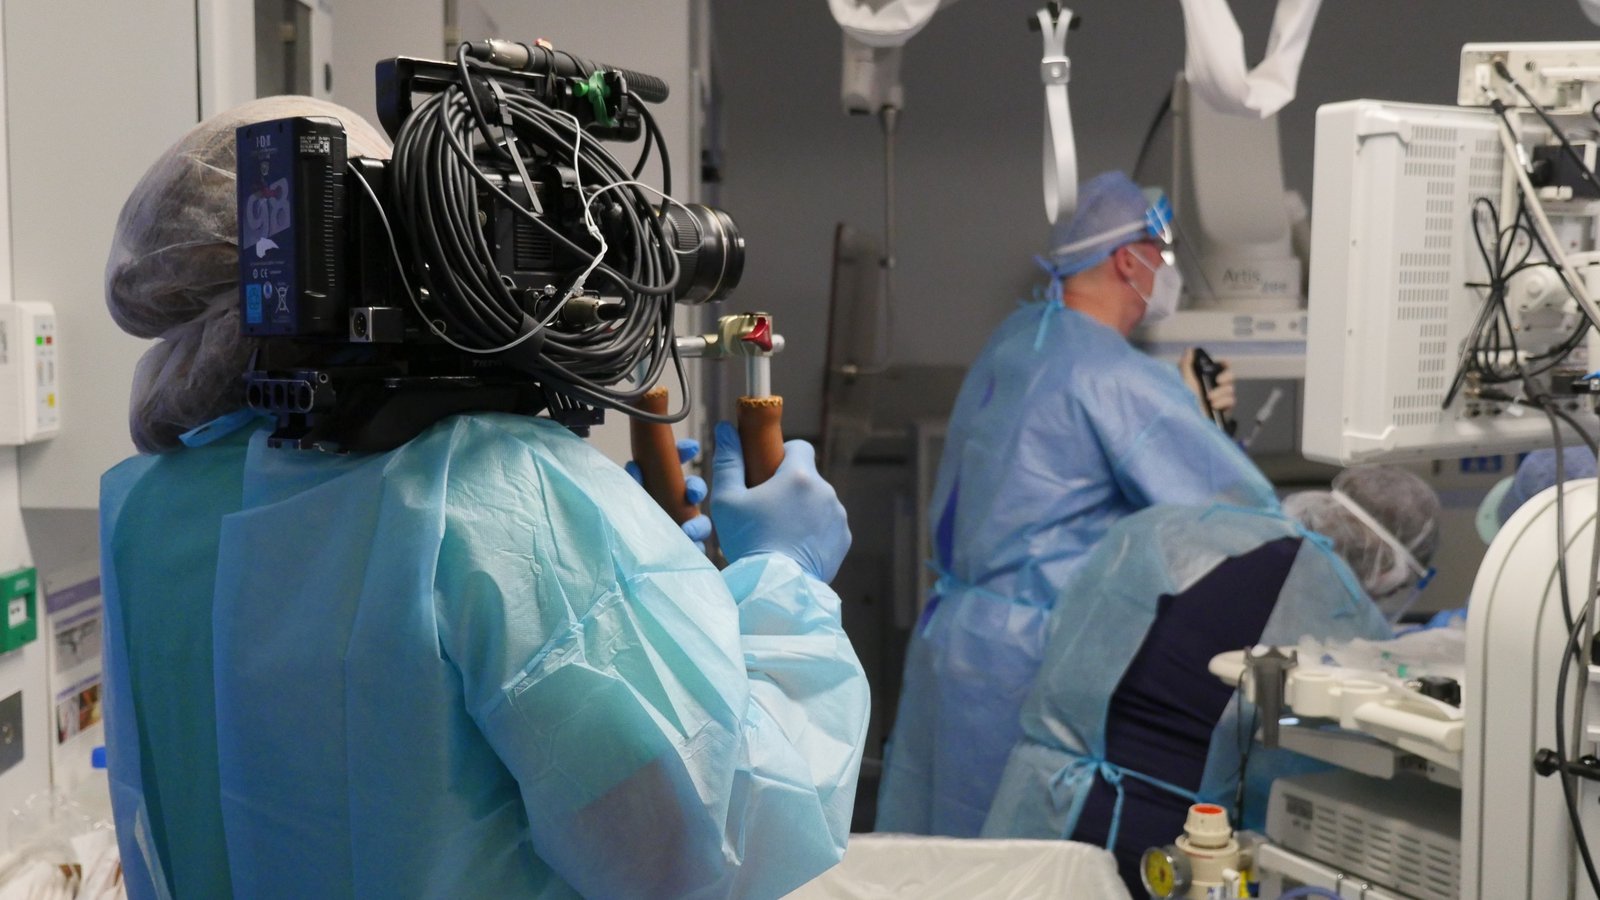 Image - RTÉ Investigates had up to 4 camera operators filming in the hospital for up to 12 hours a day